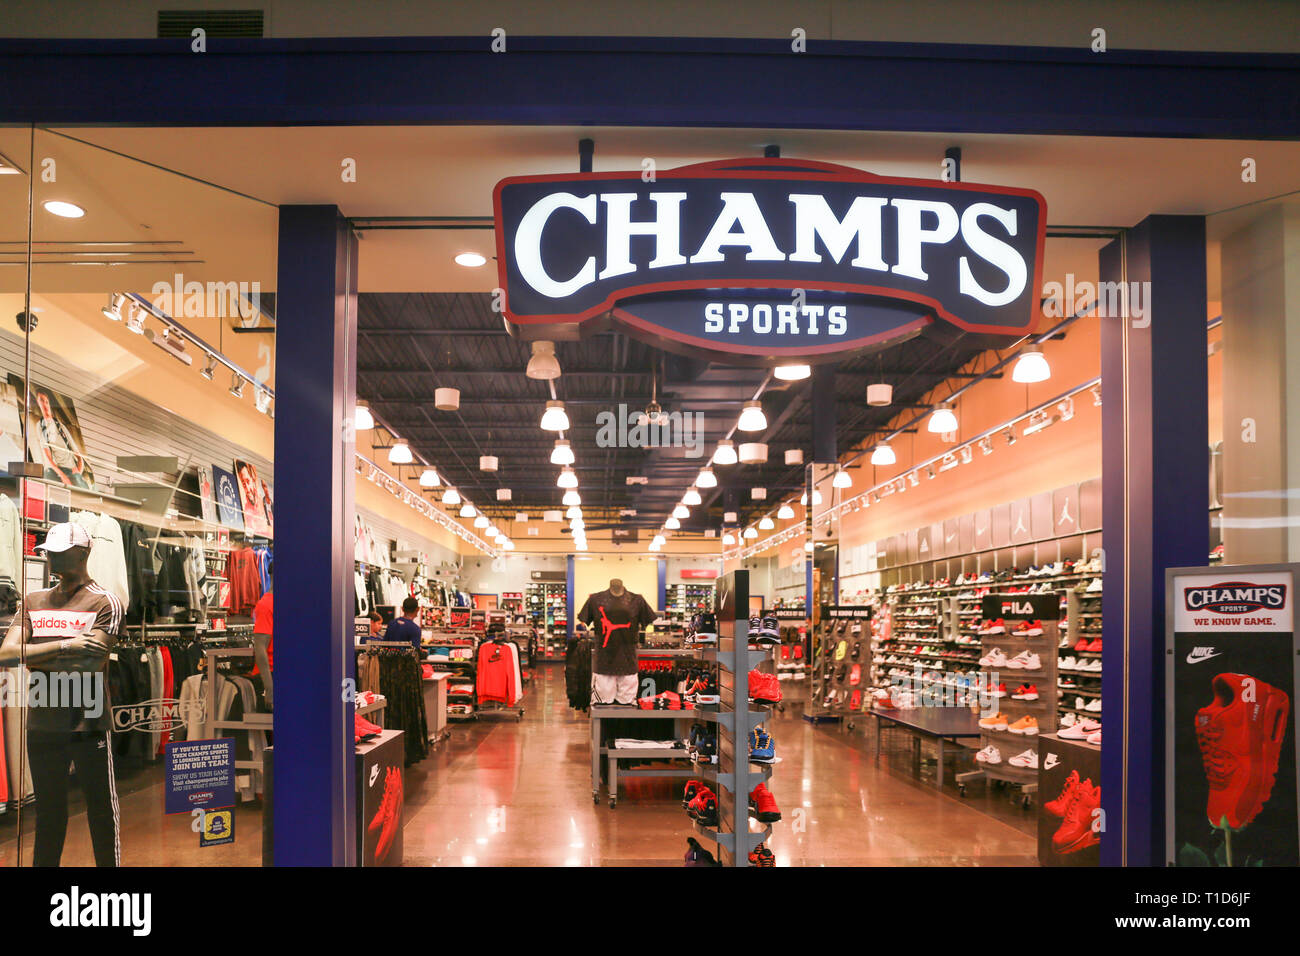 Lawrence County New Jersey, 24. Februar 2019: Champs Sports Store Front in Quaker Bridge Mall.. Champs Sports ist ein American Sports Store Stockfoto